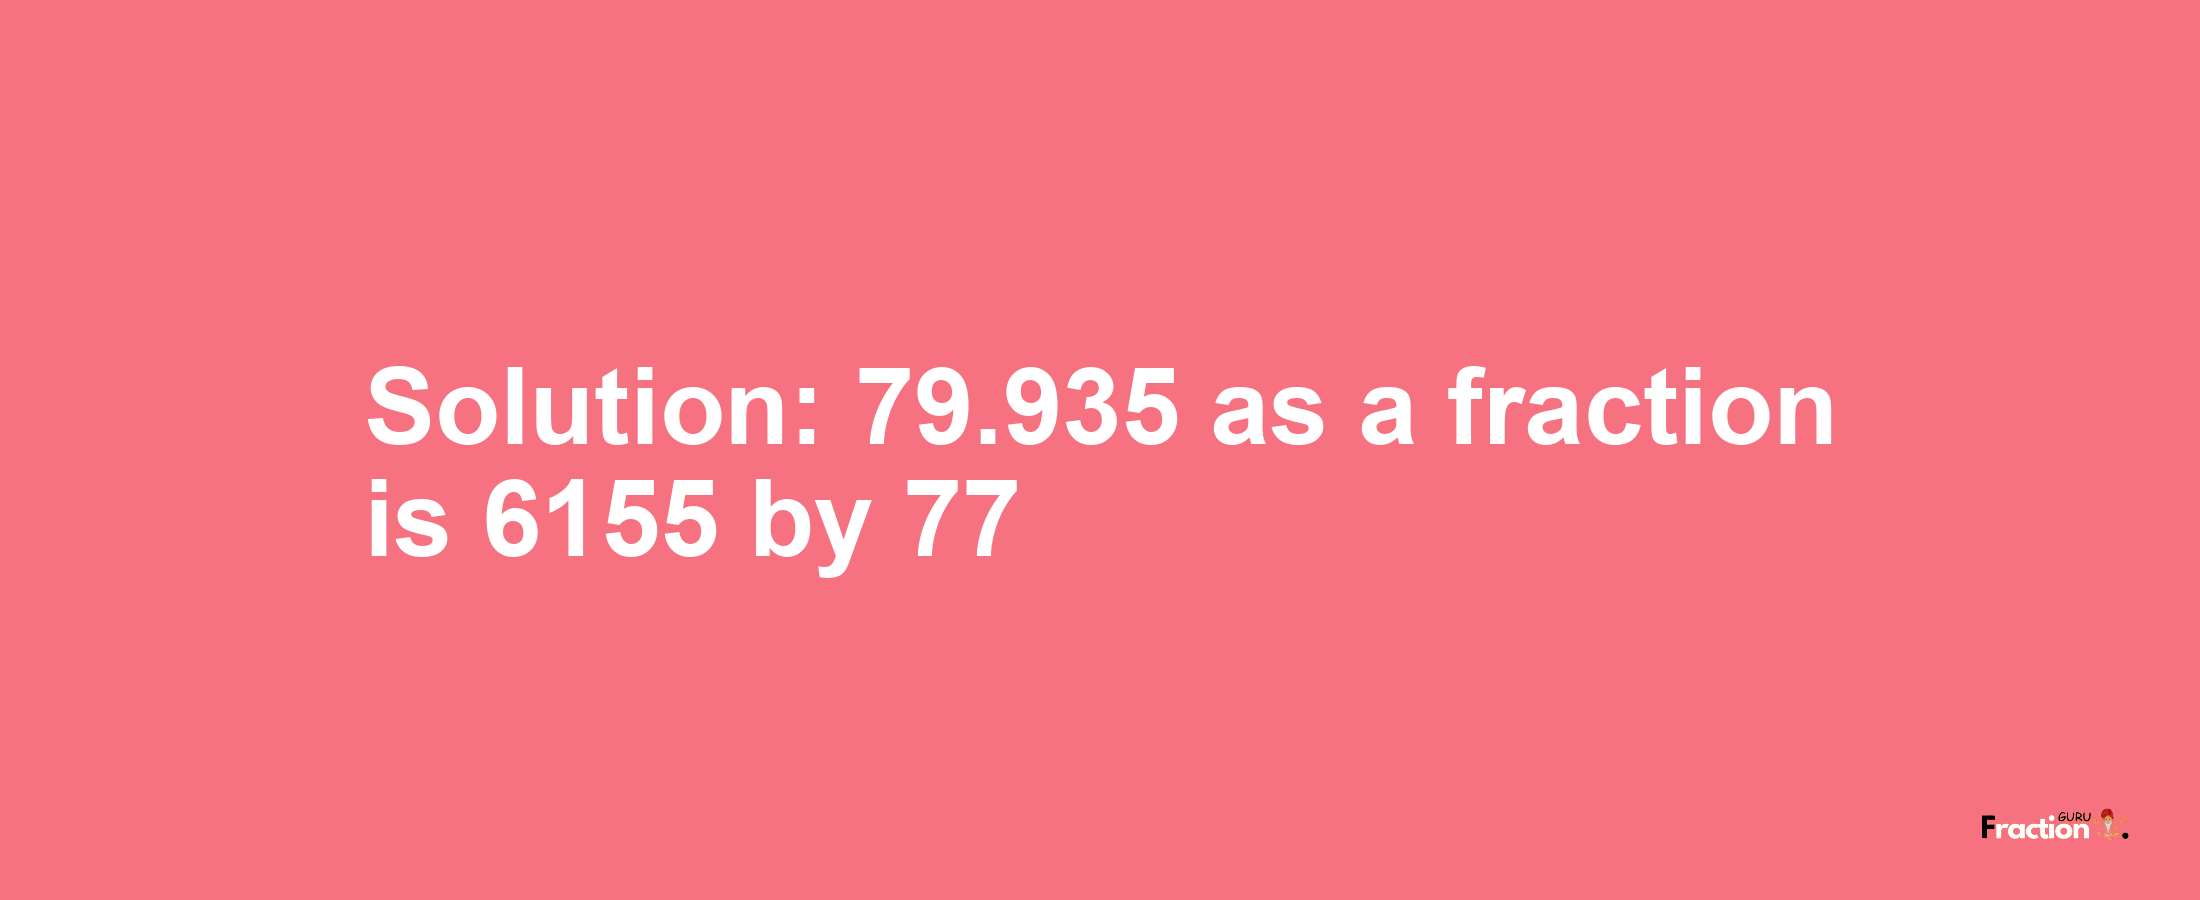 Solution:79.935 as a fraction is 6155/77